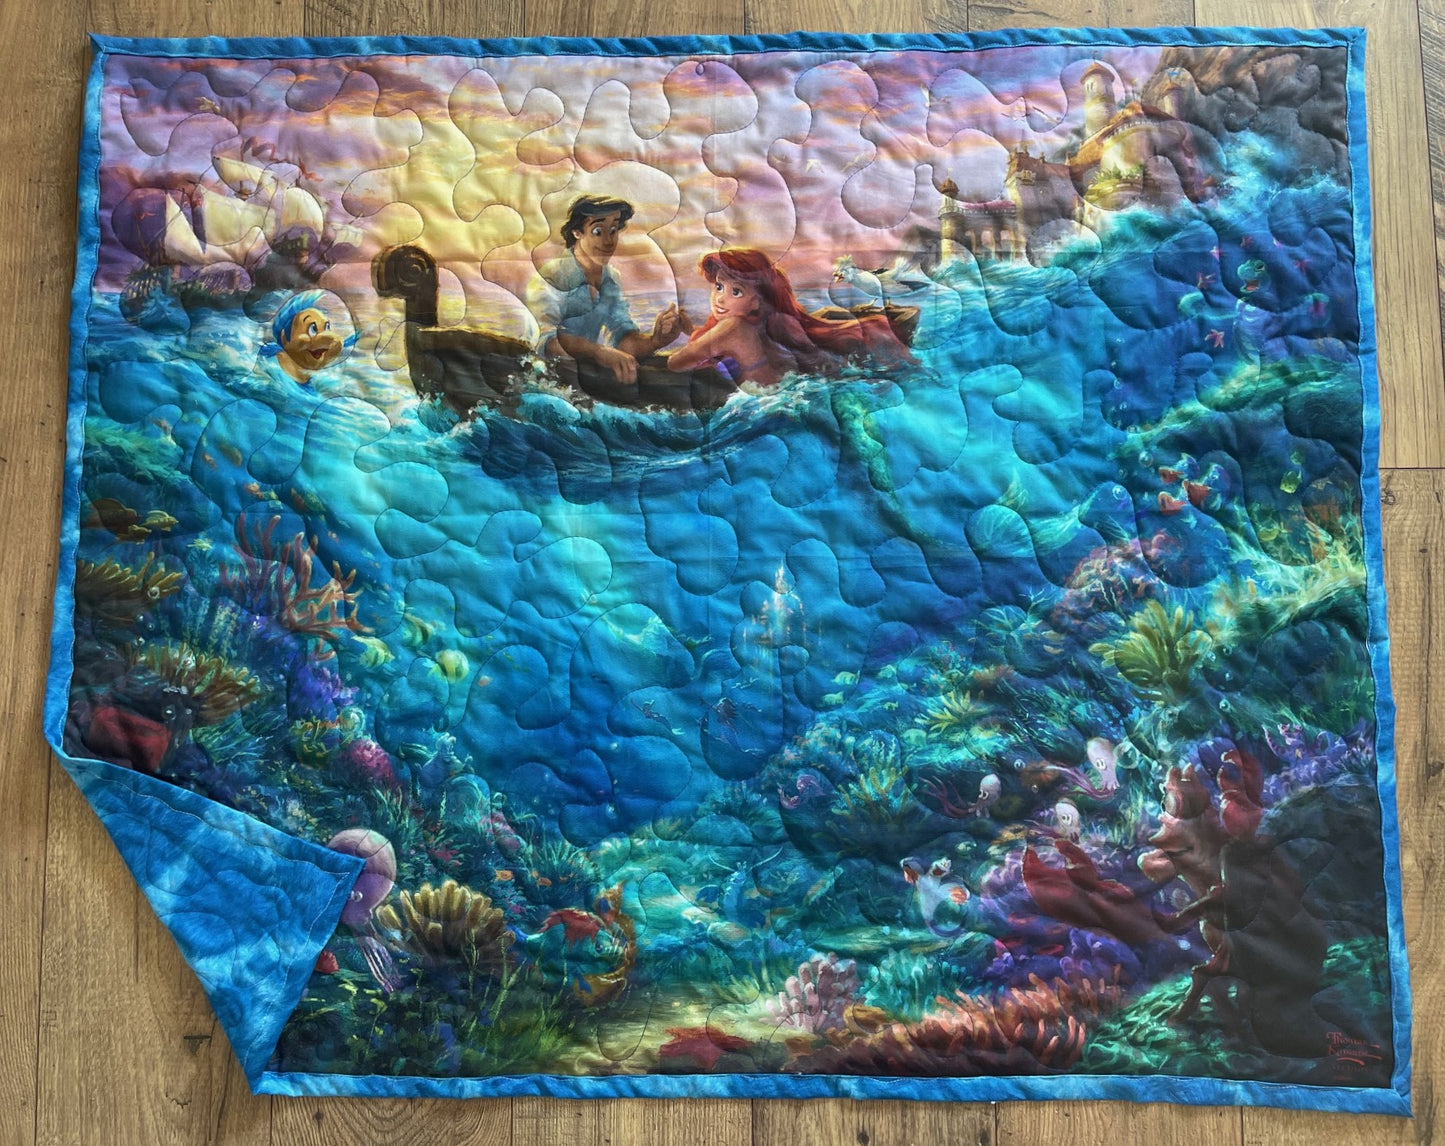 LITTLE MERMAID Inspired ARIEL AND ERIC FALLING IN LOVE QUILTED Blanket 36"x44" DIGITAL PRINT 1 AVAILABLE